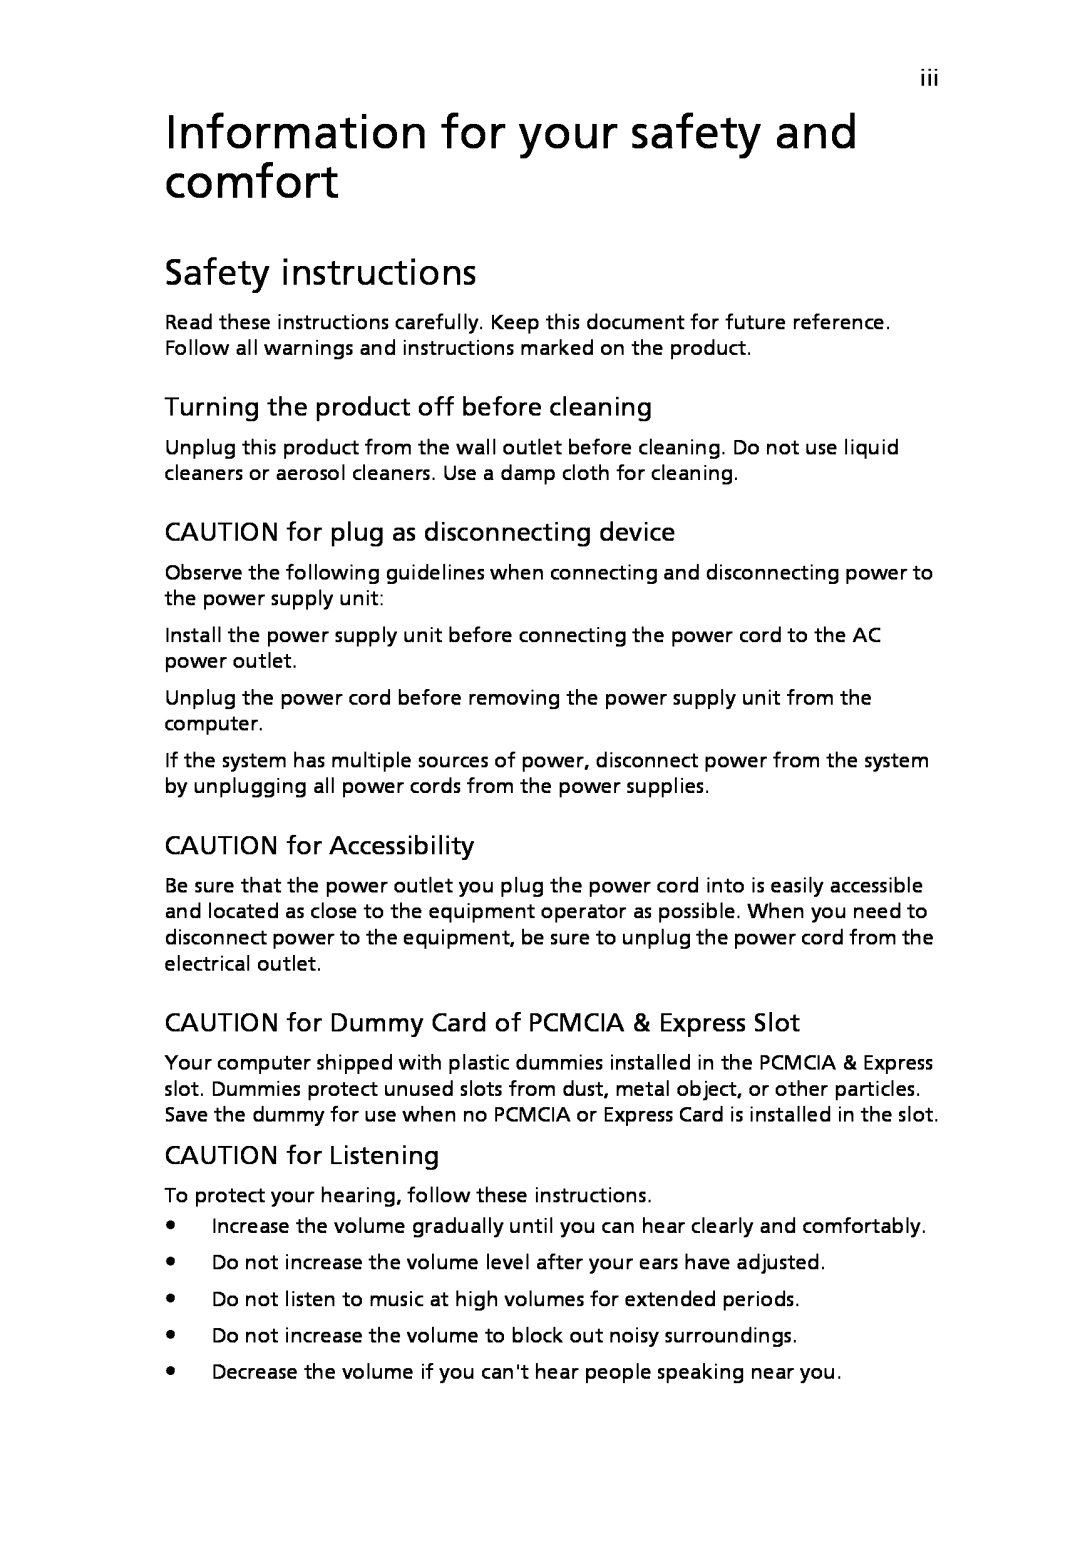 Acer 6492 Series Information for your safety and comfort, Safety instructions, Turning the product off before cleaning 